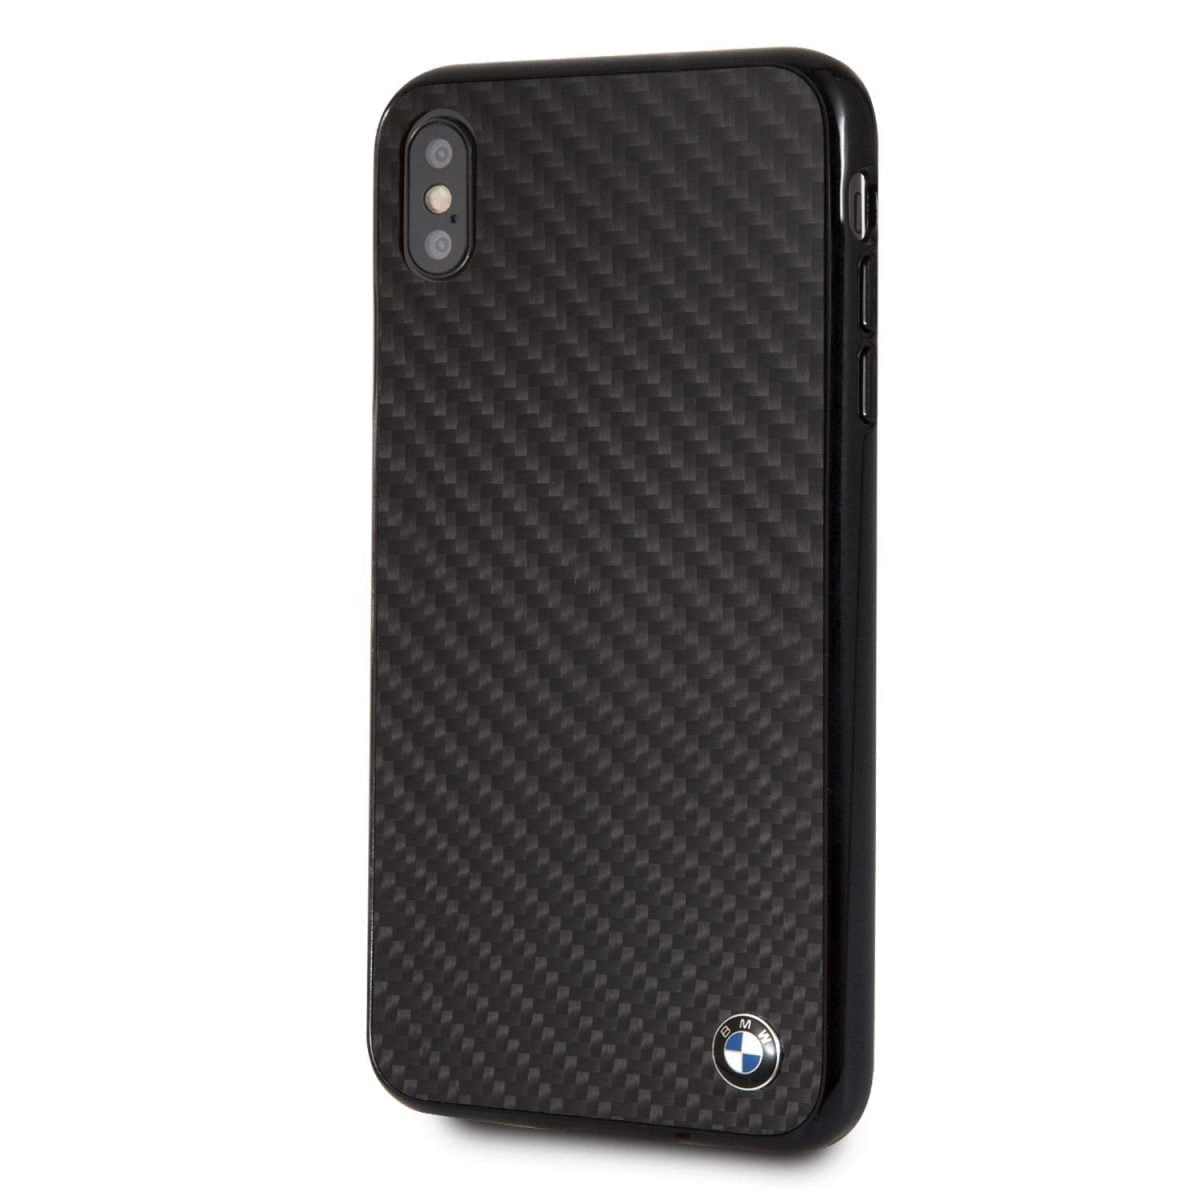 Cg Mobile Bmw Iphone Xs Max Case Black Carbon Hard Cell Phone Case Carbon Fiber Easily Accessible Ports Officially Licensed 01 غطاء آيفون ايفون Xs ألياف الكربون السوداء (Bmw)